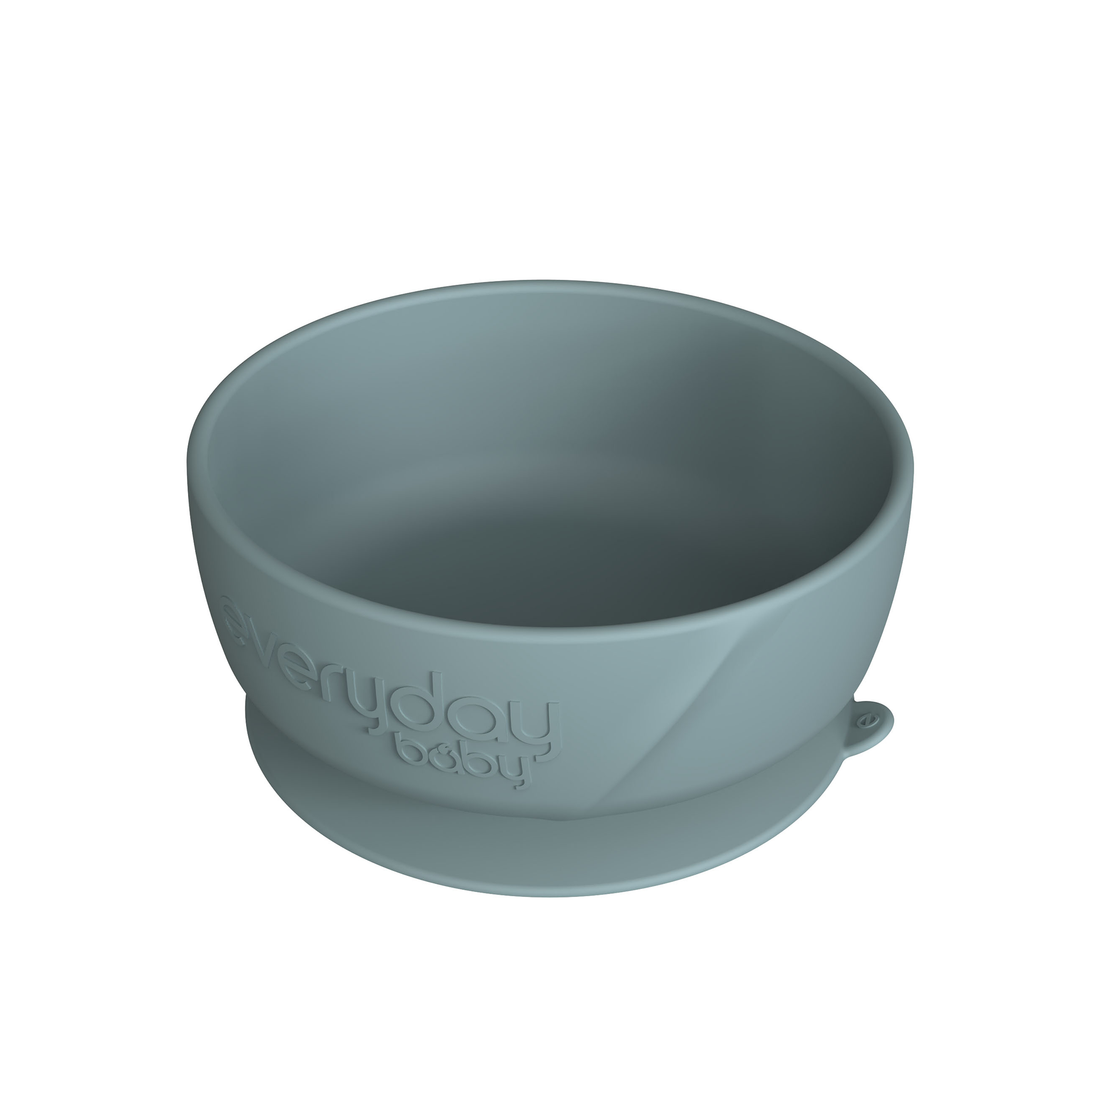 2-Cup Mint Green Silicone Liquid Measuring Cup